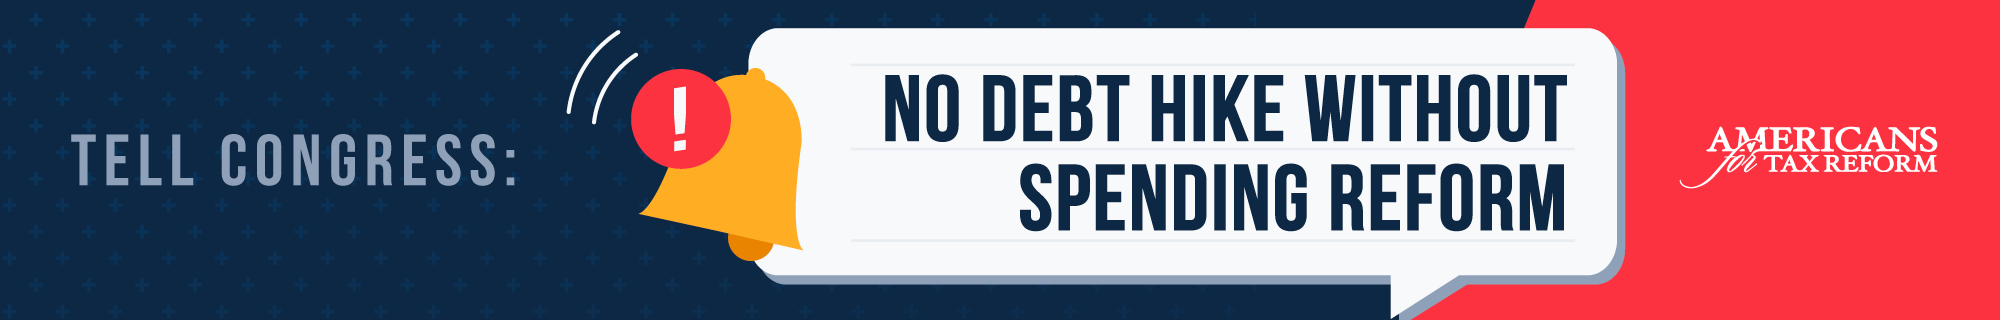 Tell Congress: No Debt Hike Without Spending Reform